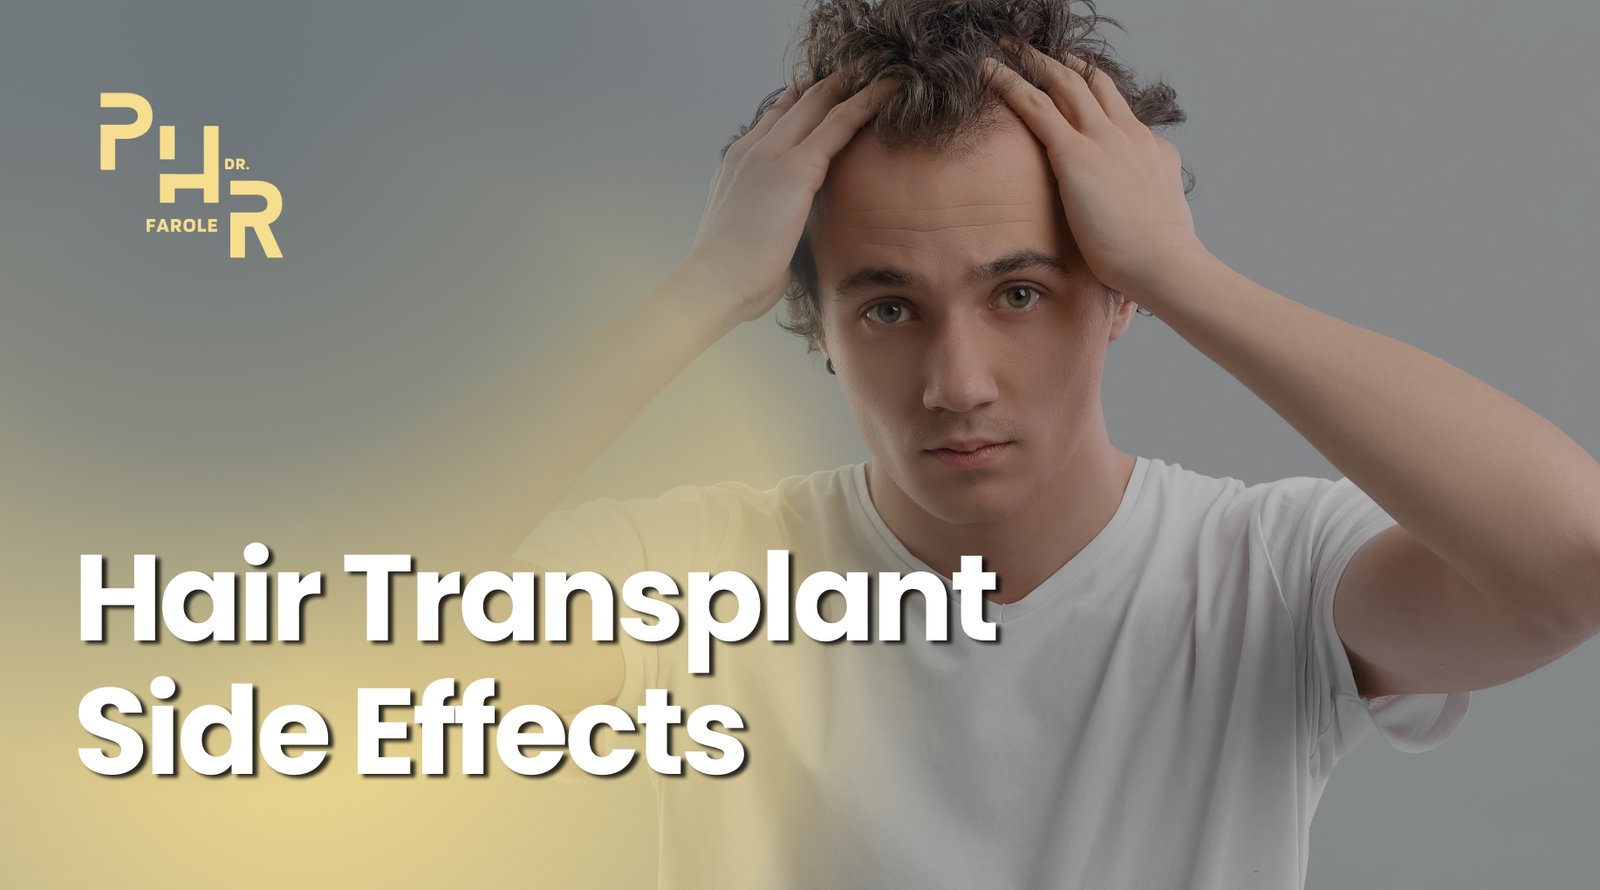 Hair Transplant Side Effects During Post-Operative Recovery